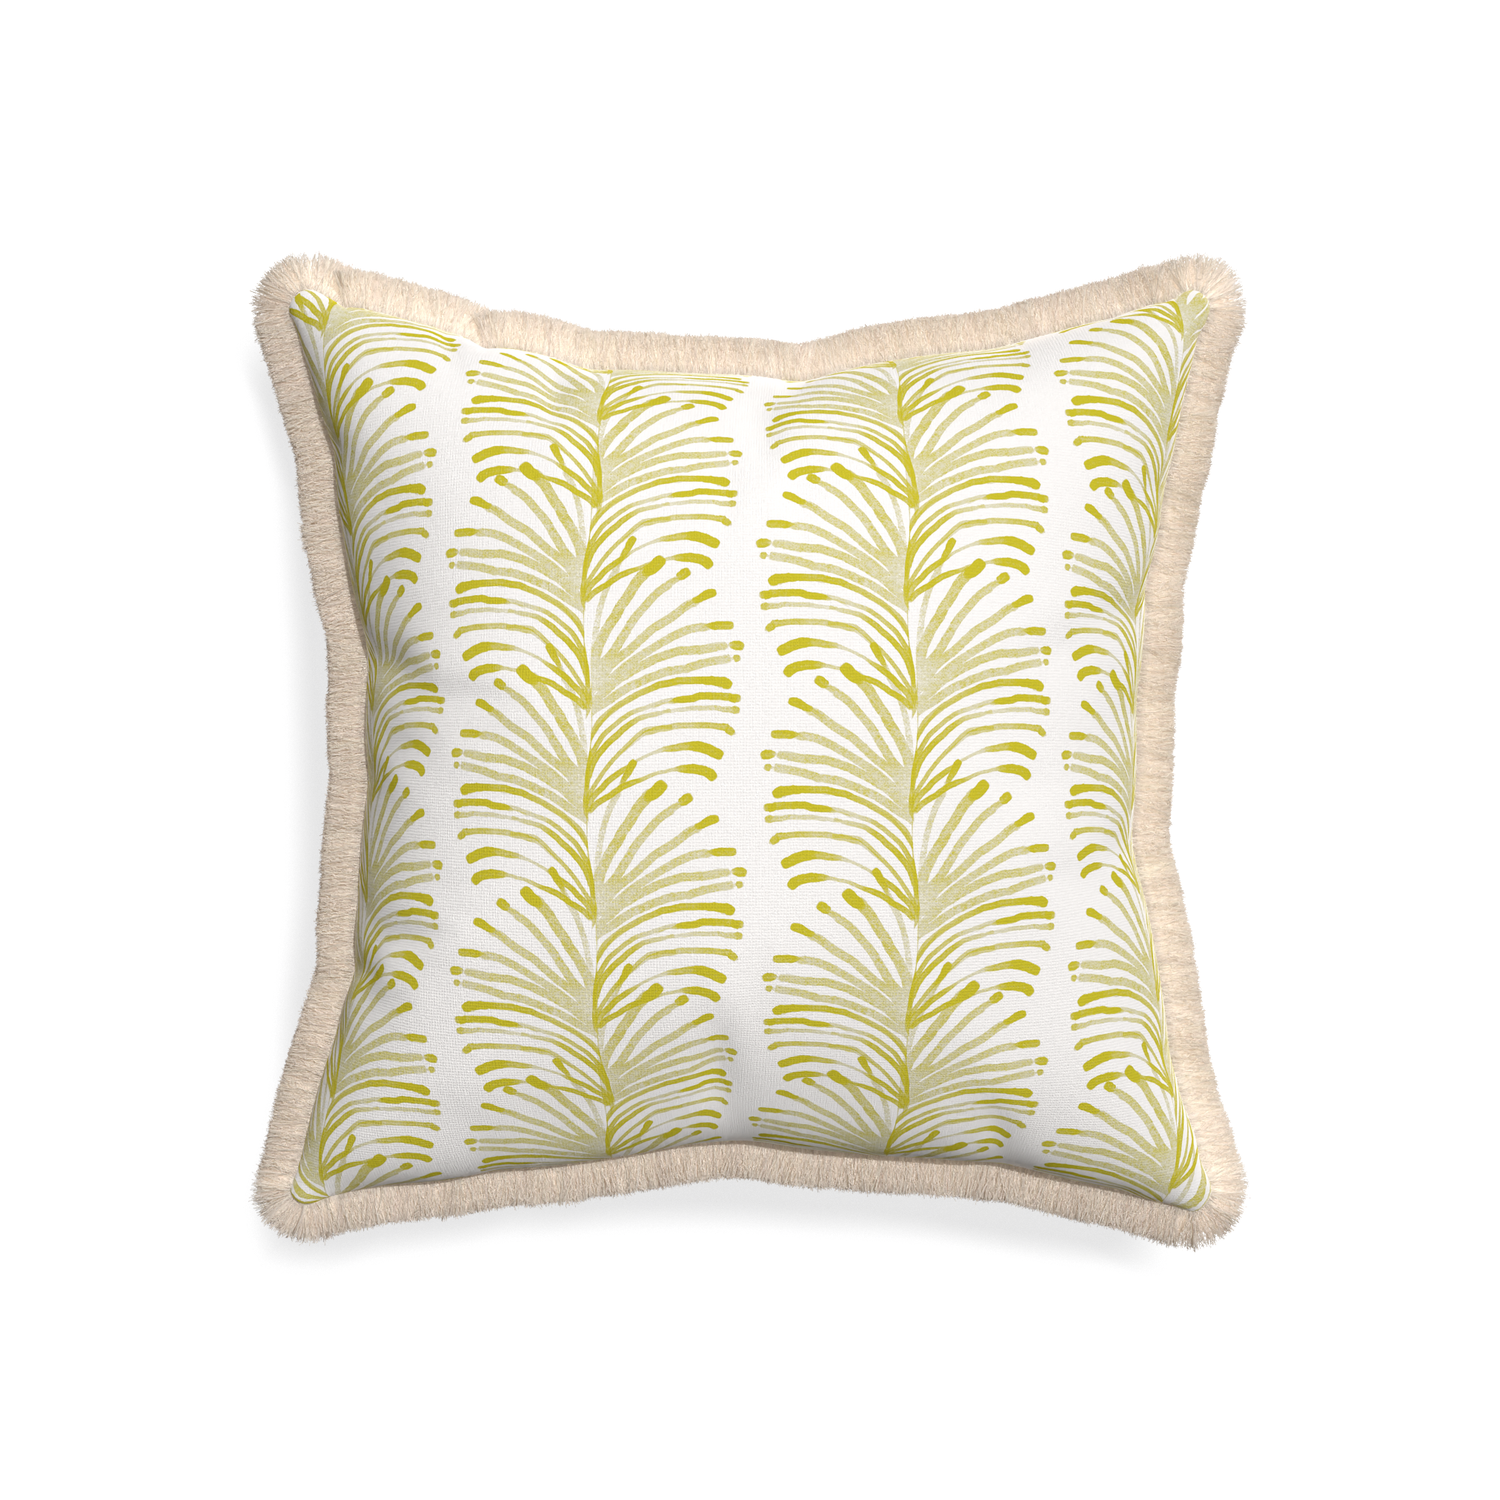 20-square emma chartreuse custom yellow stripe chartreusepillow with cream fringe on white background